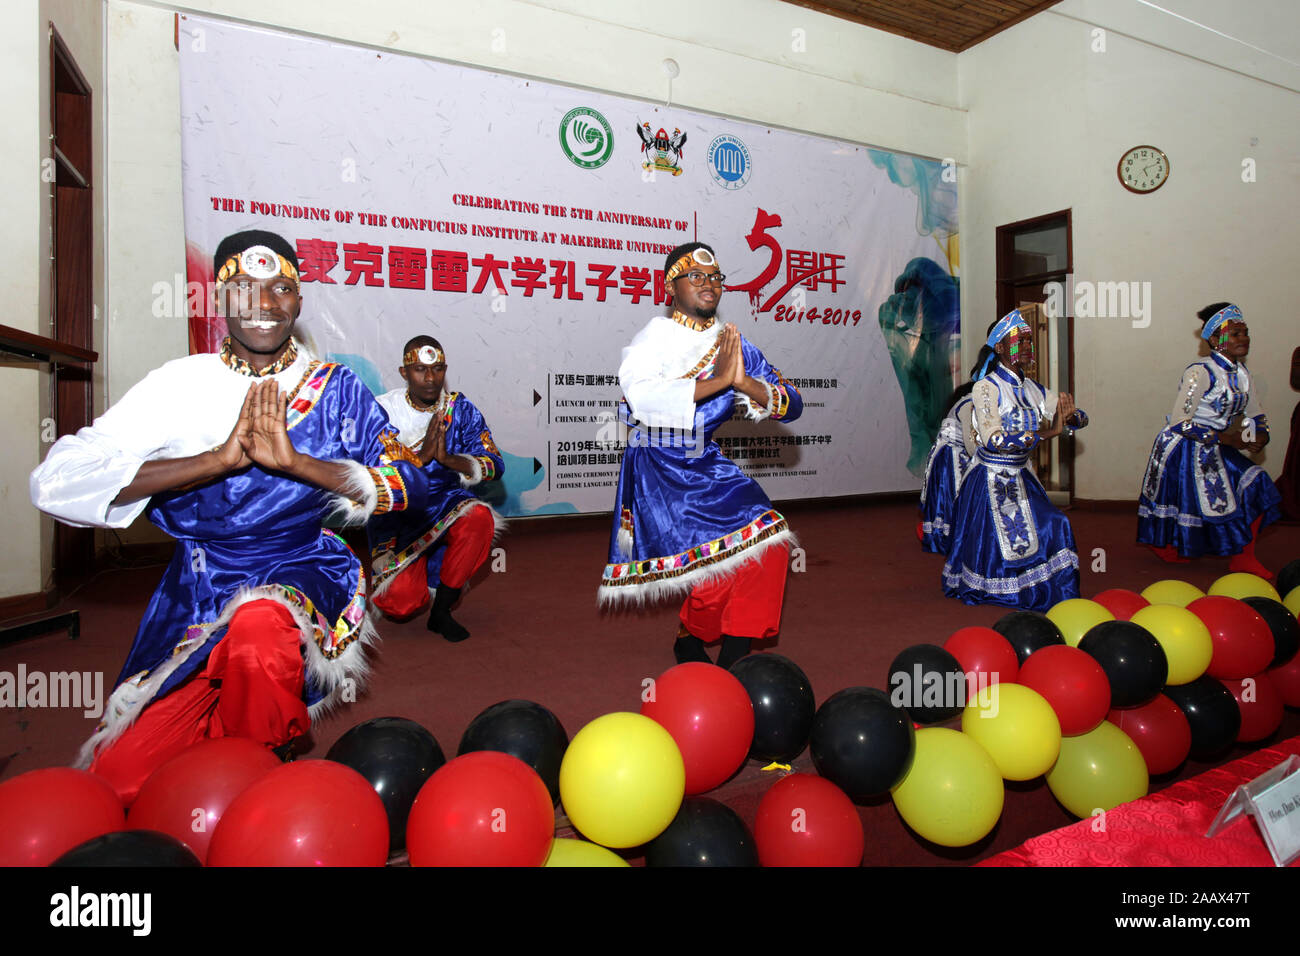 Kampala, Uganda. 23rd Nov, 2019. Students of the Confucius Institute at Makerere University perform at an event celebrating the 5th anniversary of the founding of the institute, in Kampala, Uganda, Nov. 23, 2019. Confucius Institute at Makerere University, Uganda's top university, on Saturday celebrated its fifth anniversary. The institution, as the nexus of Chinese language teaching, is playing a major role for cultural exchange between Uganda and China. Credit: Hajarah Nalwadda/Xinhua/Alamy Live News Stock Photo